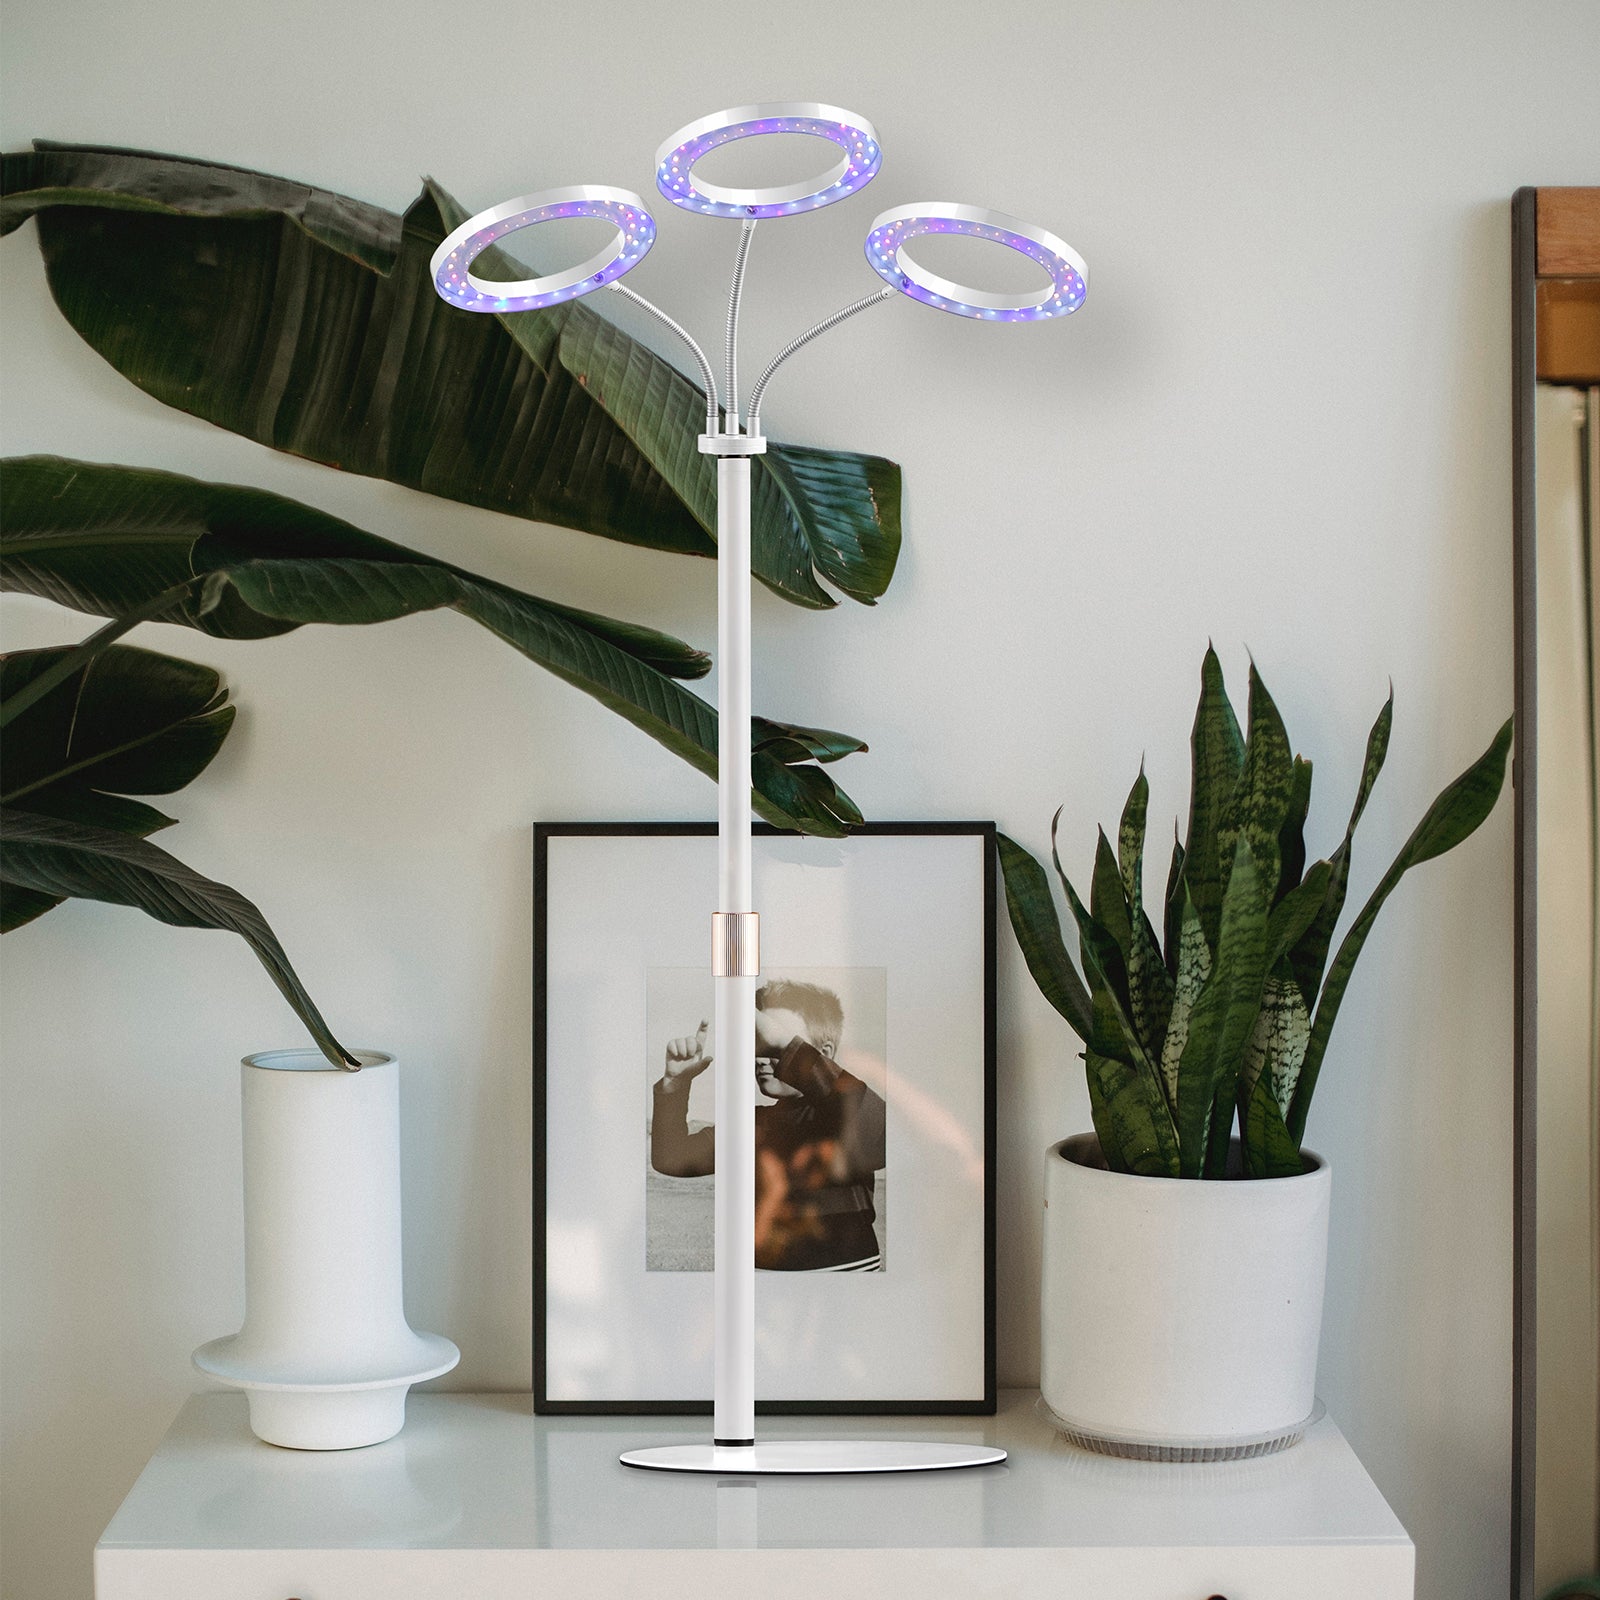 Tri-Head Plant Grow Light: Elevating Your Indoor Gardening Experience